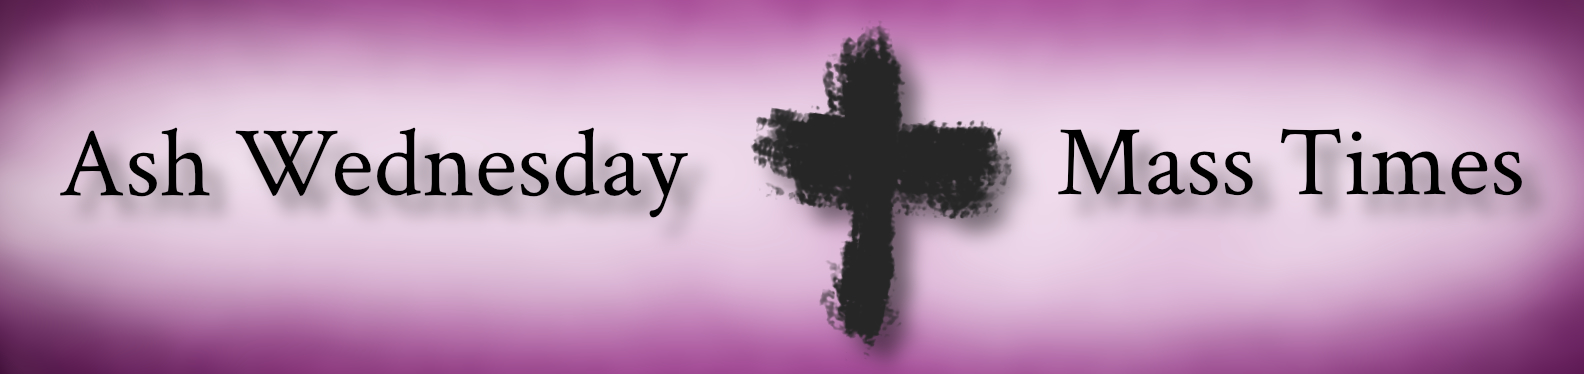 Text Ash Wednesday Mass Times image: a Cross made with ashes